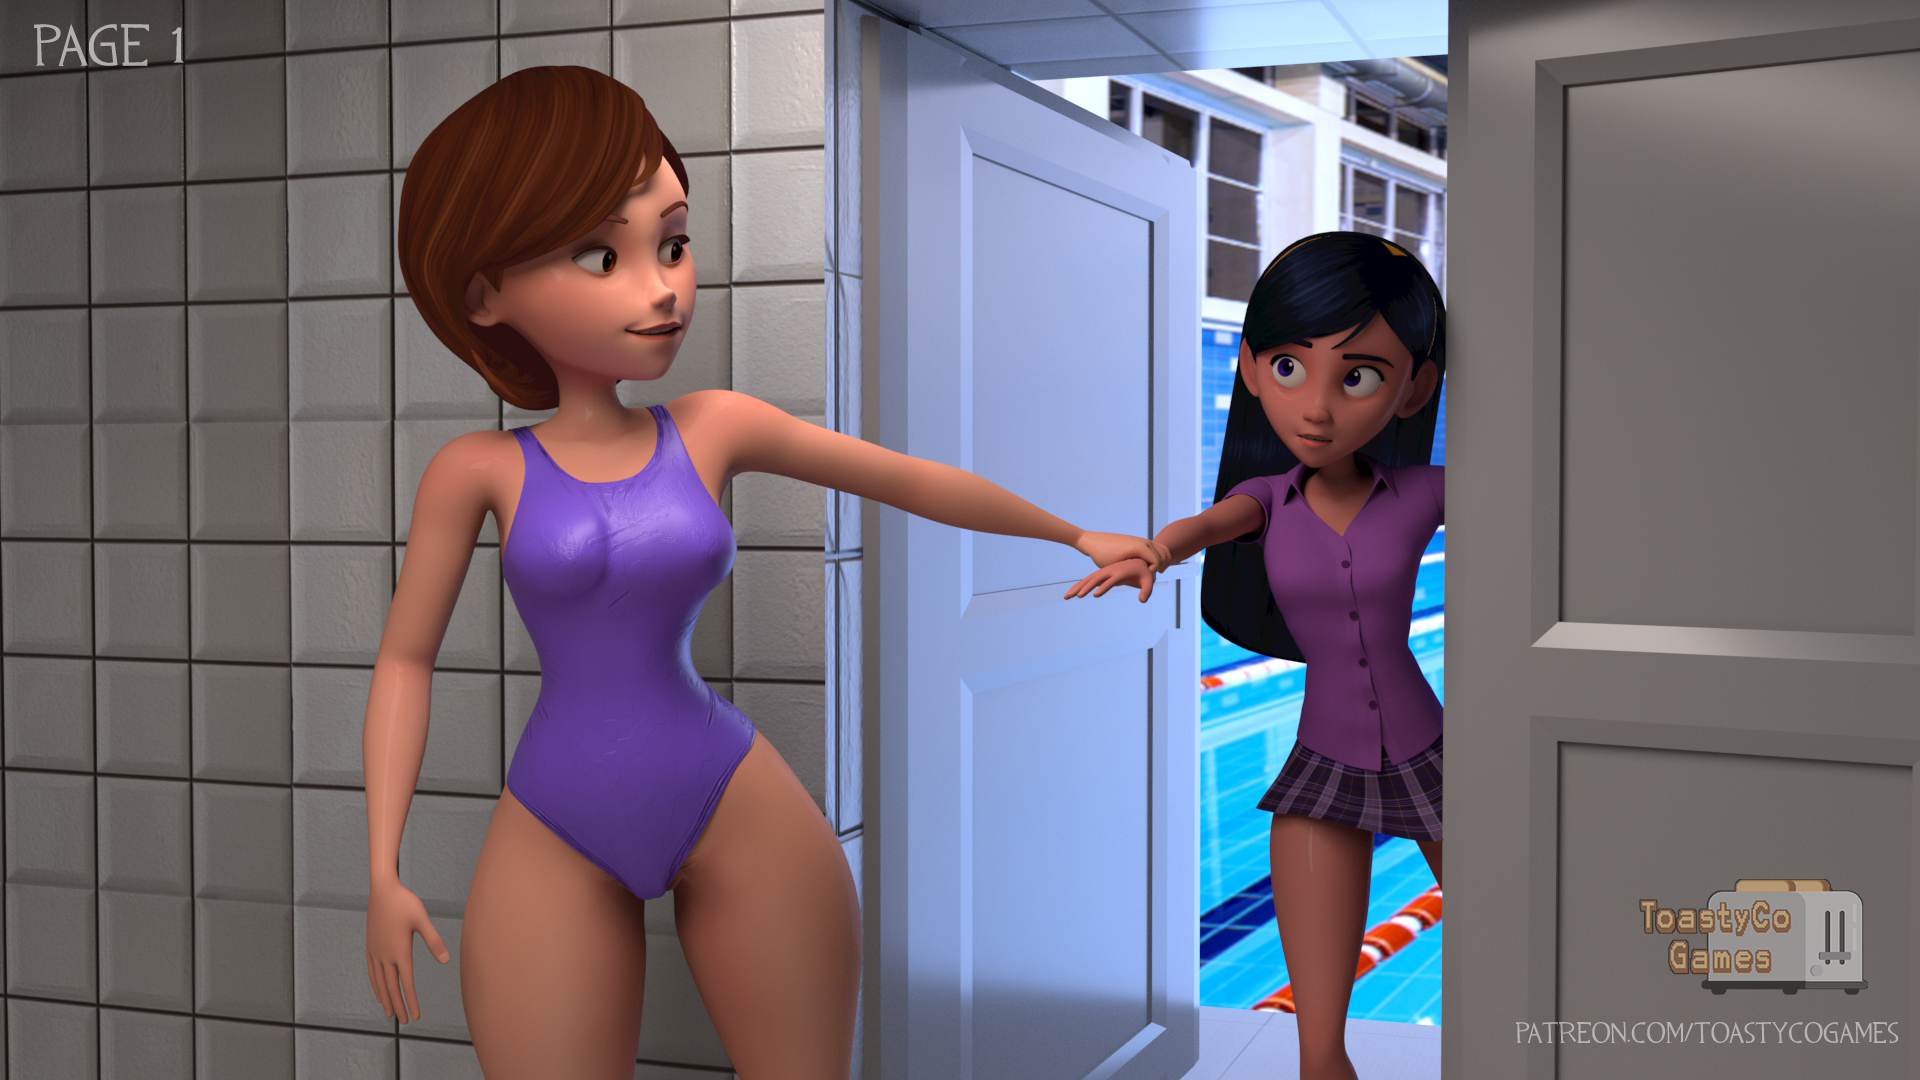 Post 3001507 Helen Parr The Incredibles Toastyco Games Violet Parr